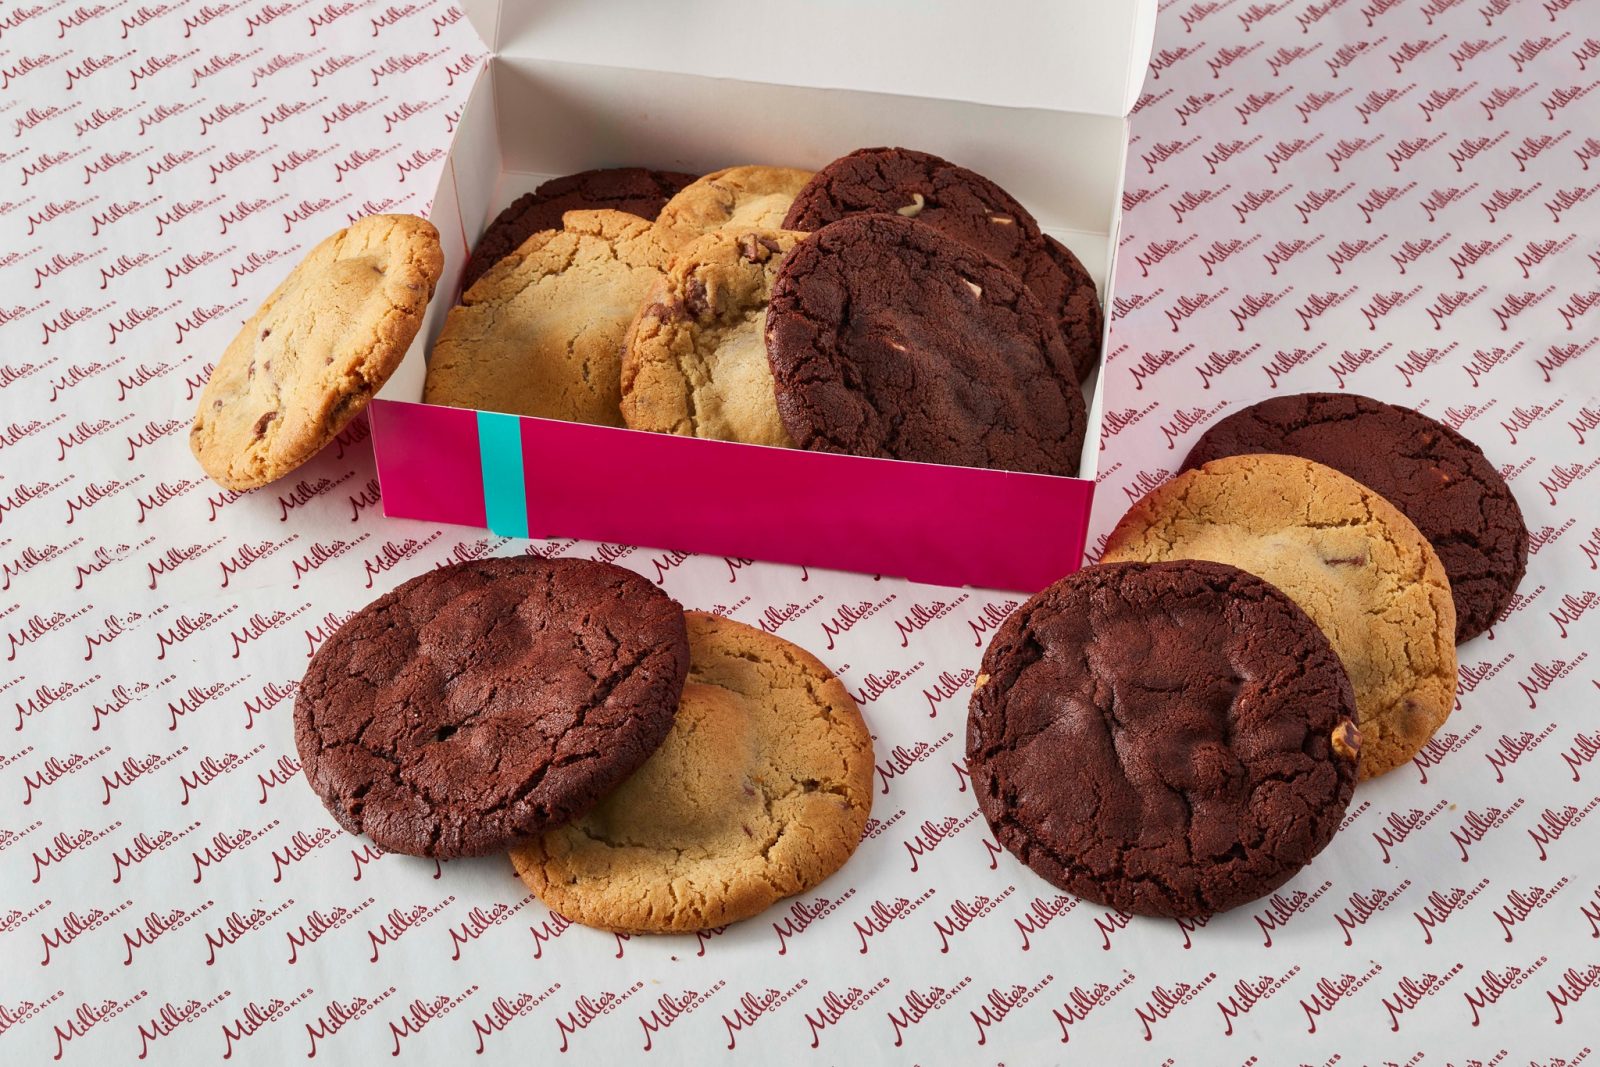 A box of cookies from Millie's Cookies.